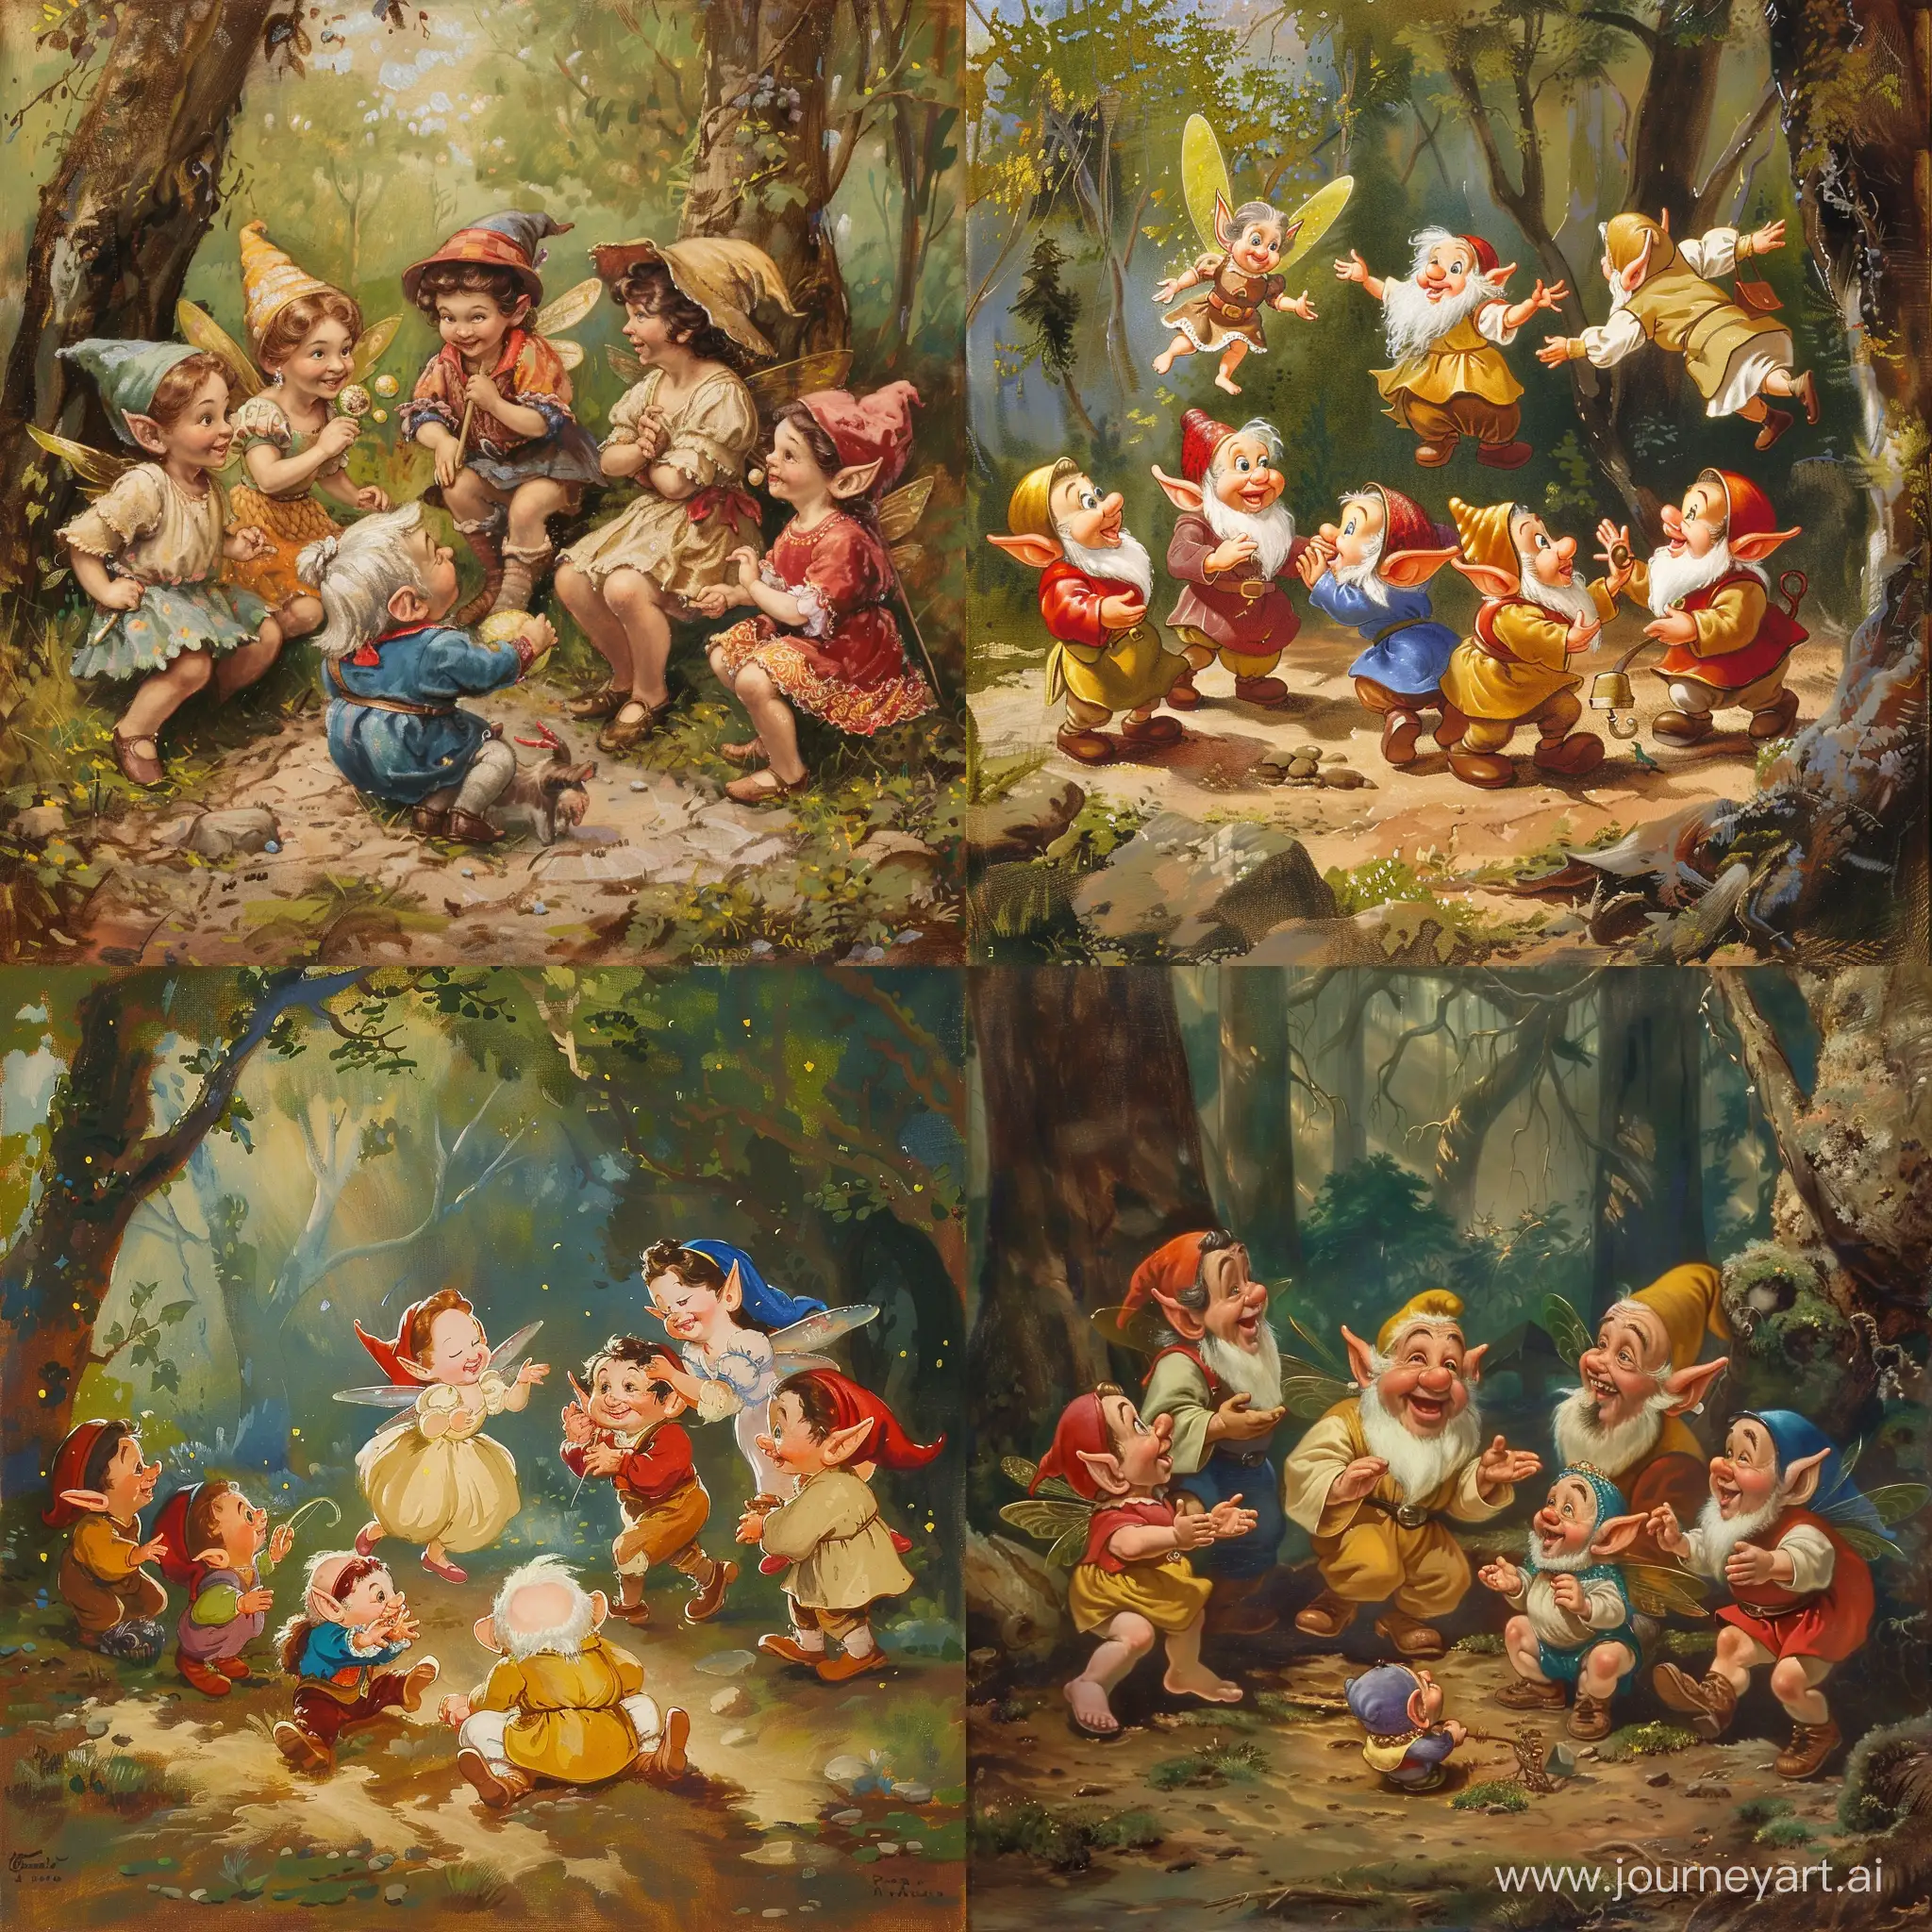 Enchanted-Playtime-Fairies-and-Dwarfs-in-Harmonious-Gathering